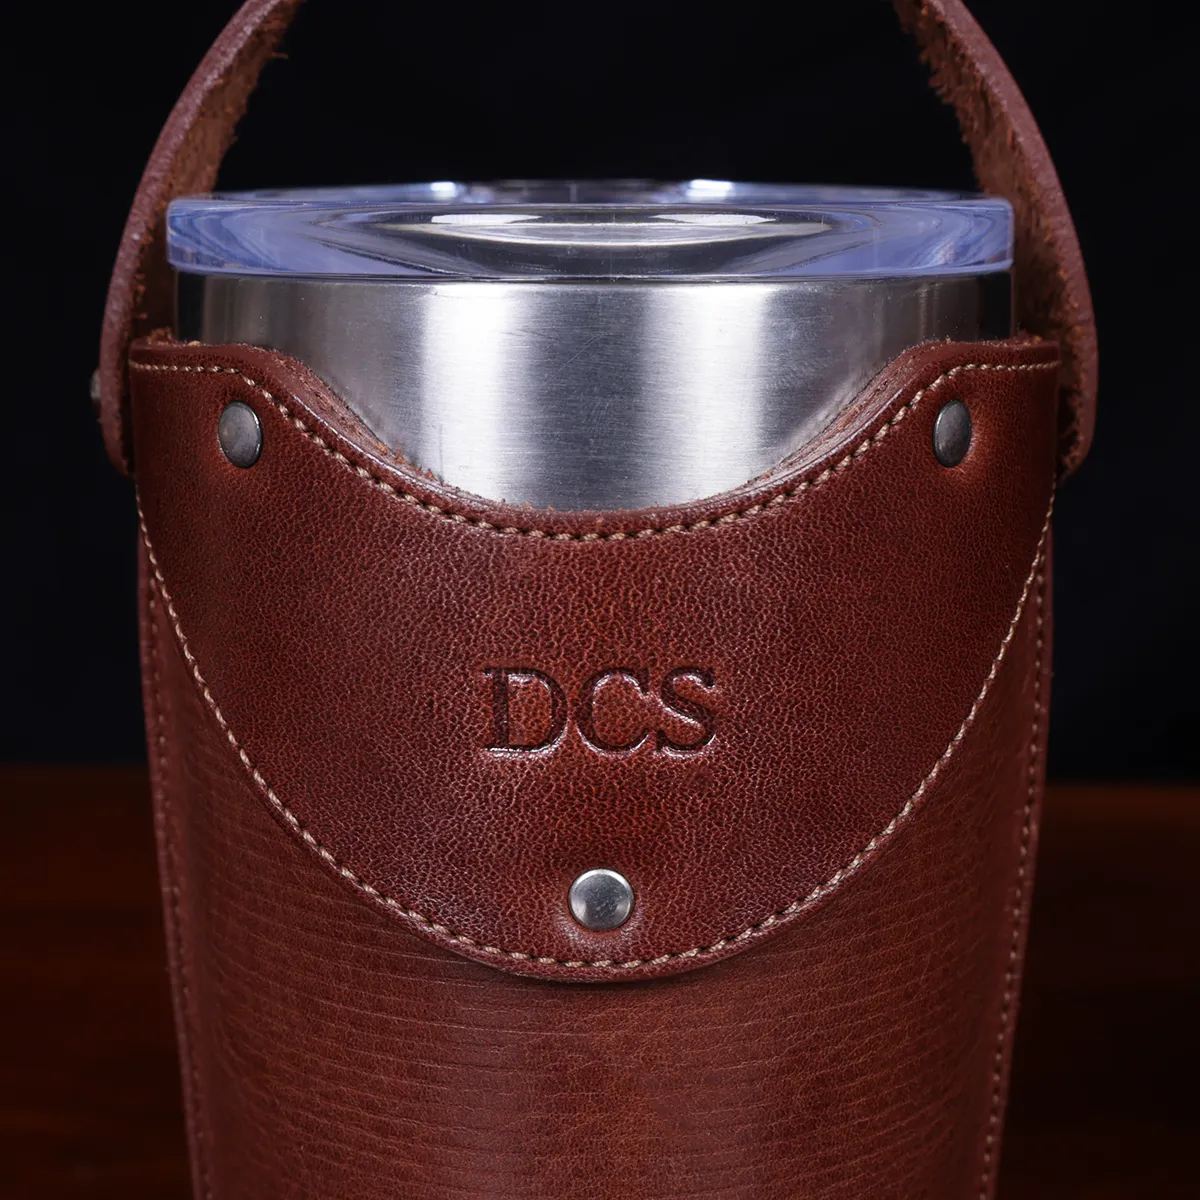 The front side of the No 20 Leather Tumbler